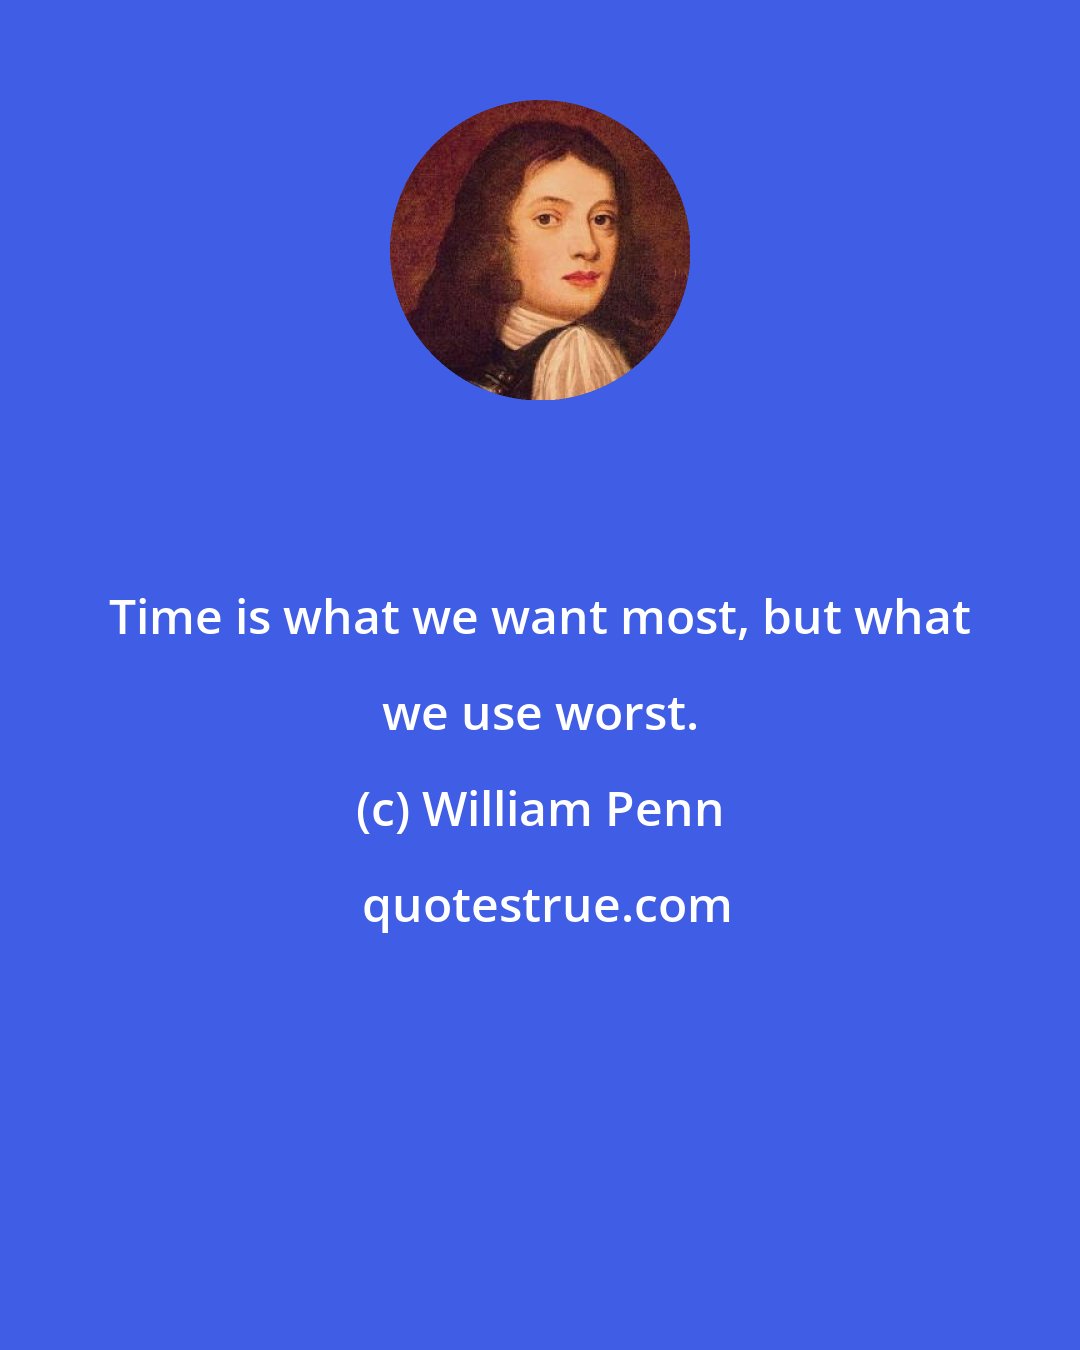 William Penn: Time is what we want most, but what we use worst.